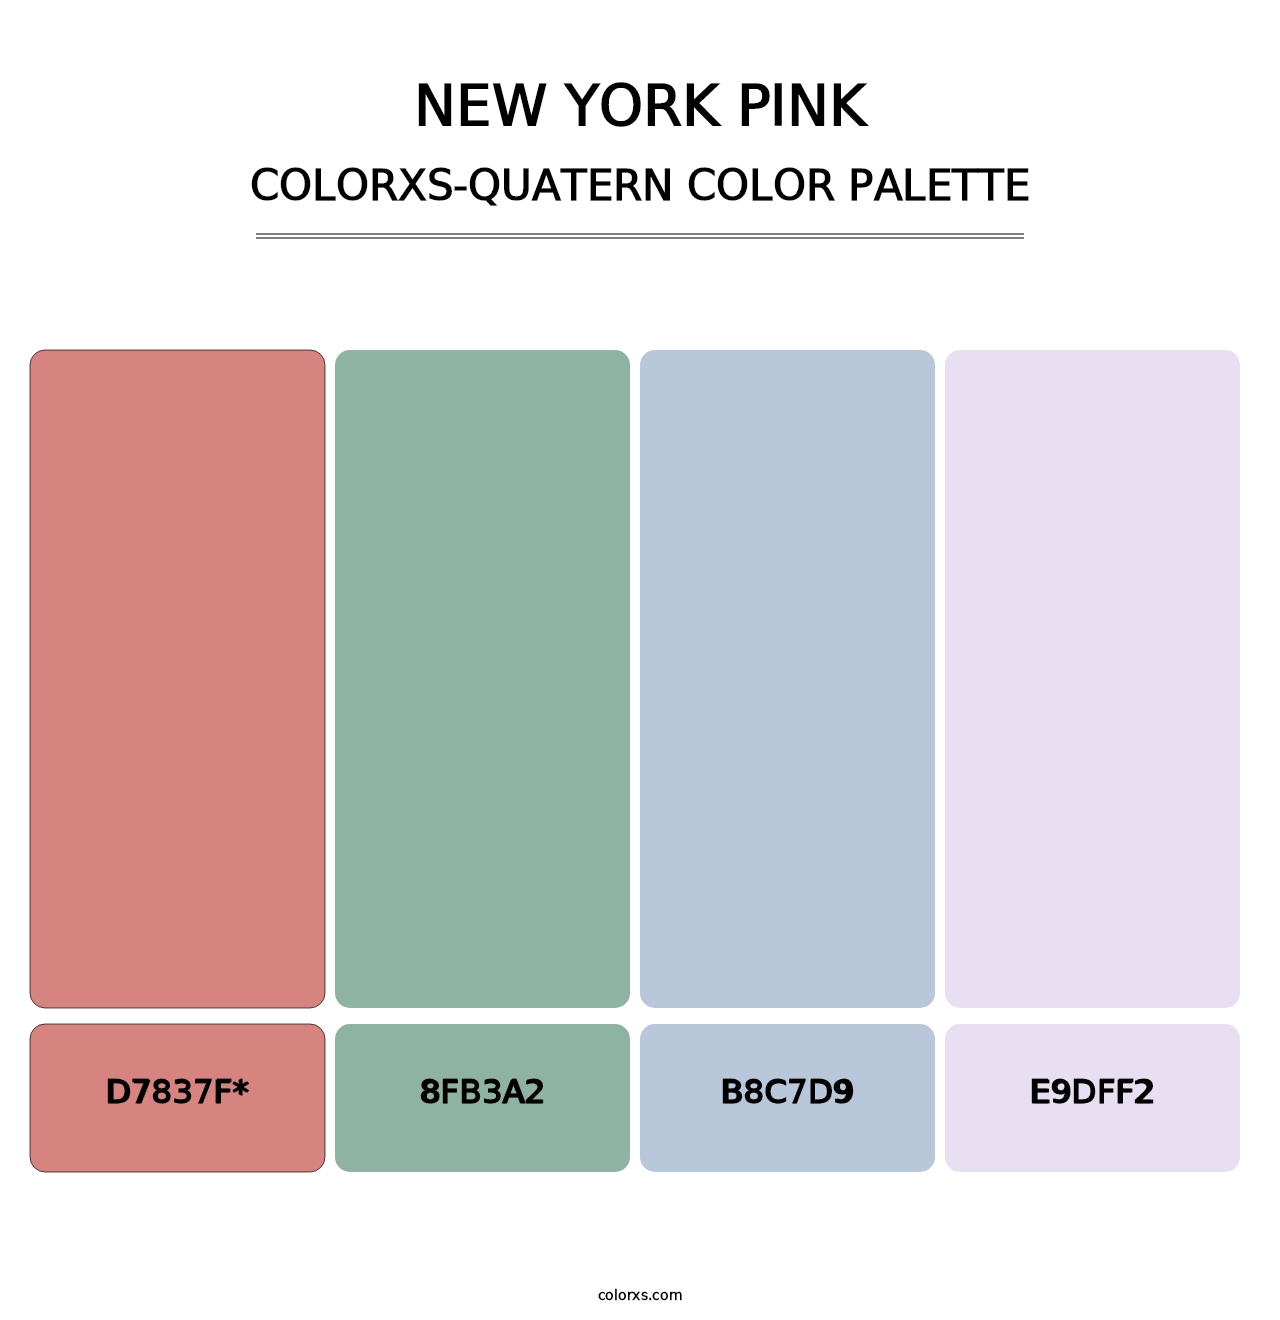 New York Pink - Colorxs Quatern Palette